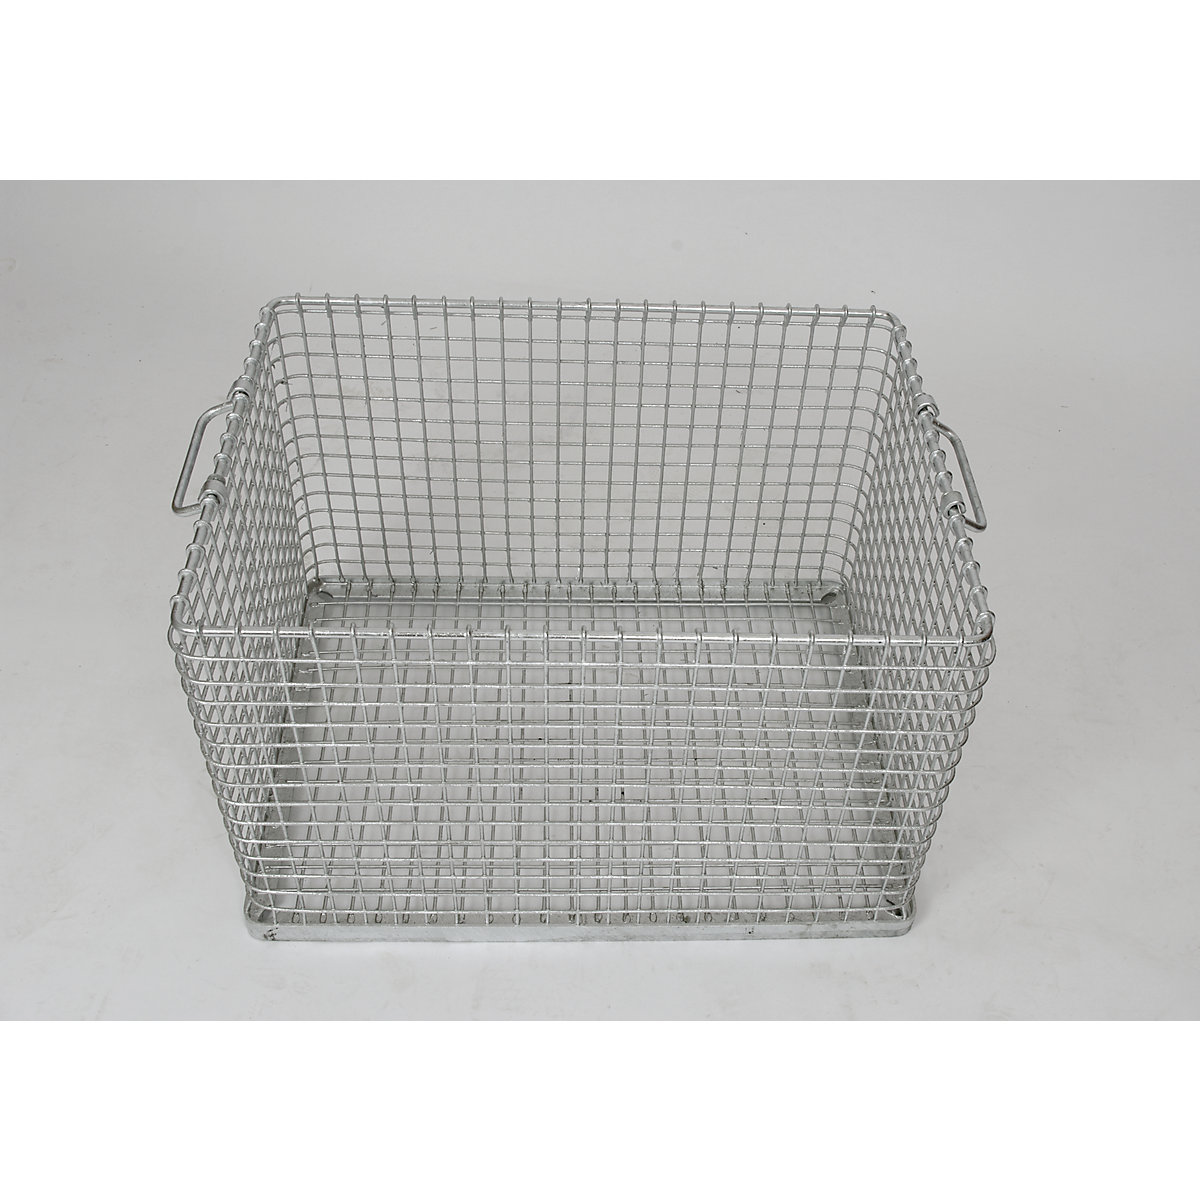 Stacking basket for heavy items, narrow mesh size, external dims. LxWxH 615 x 455 x 400 mm-5